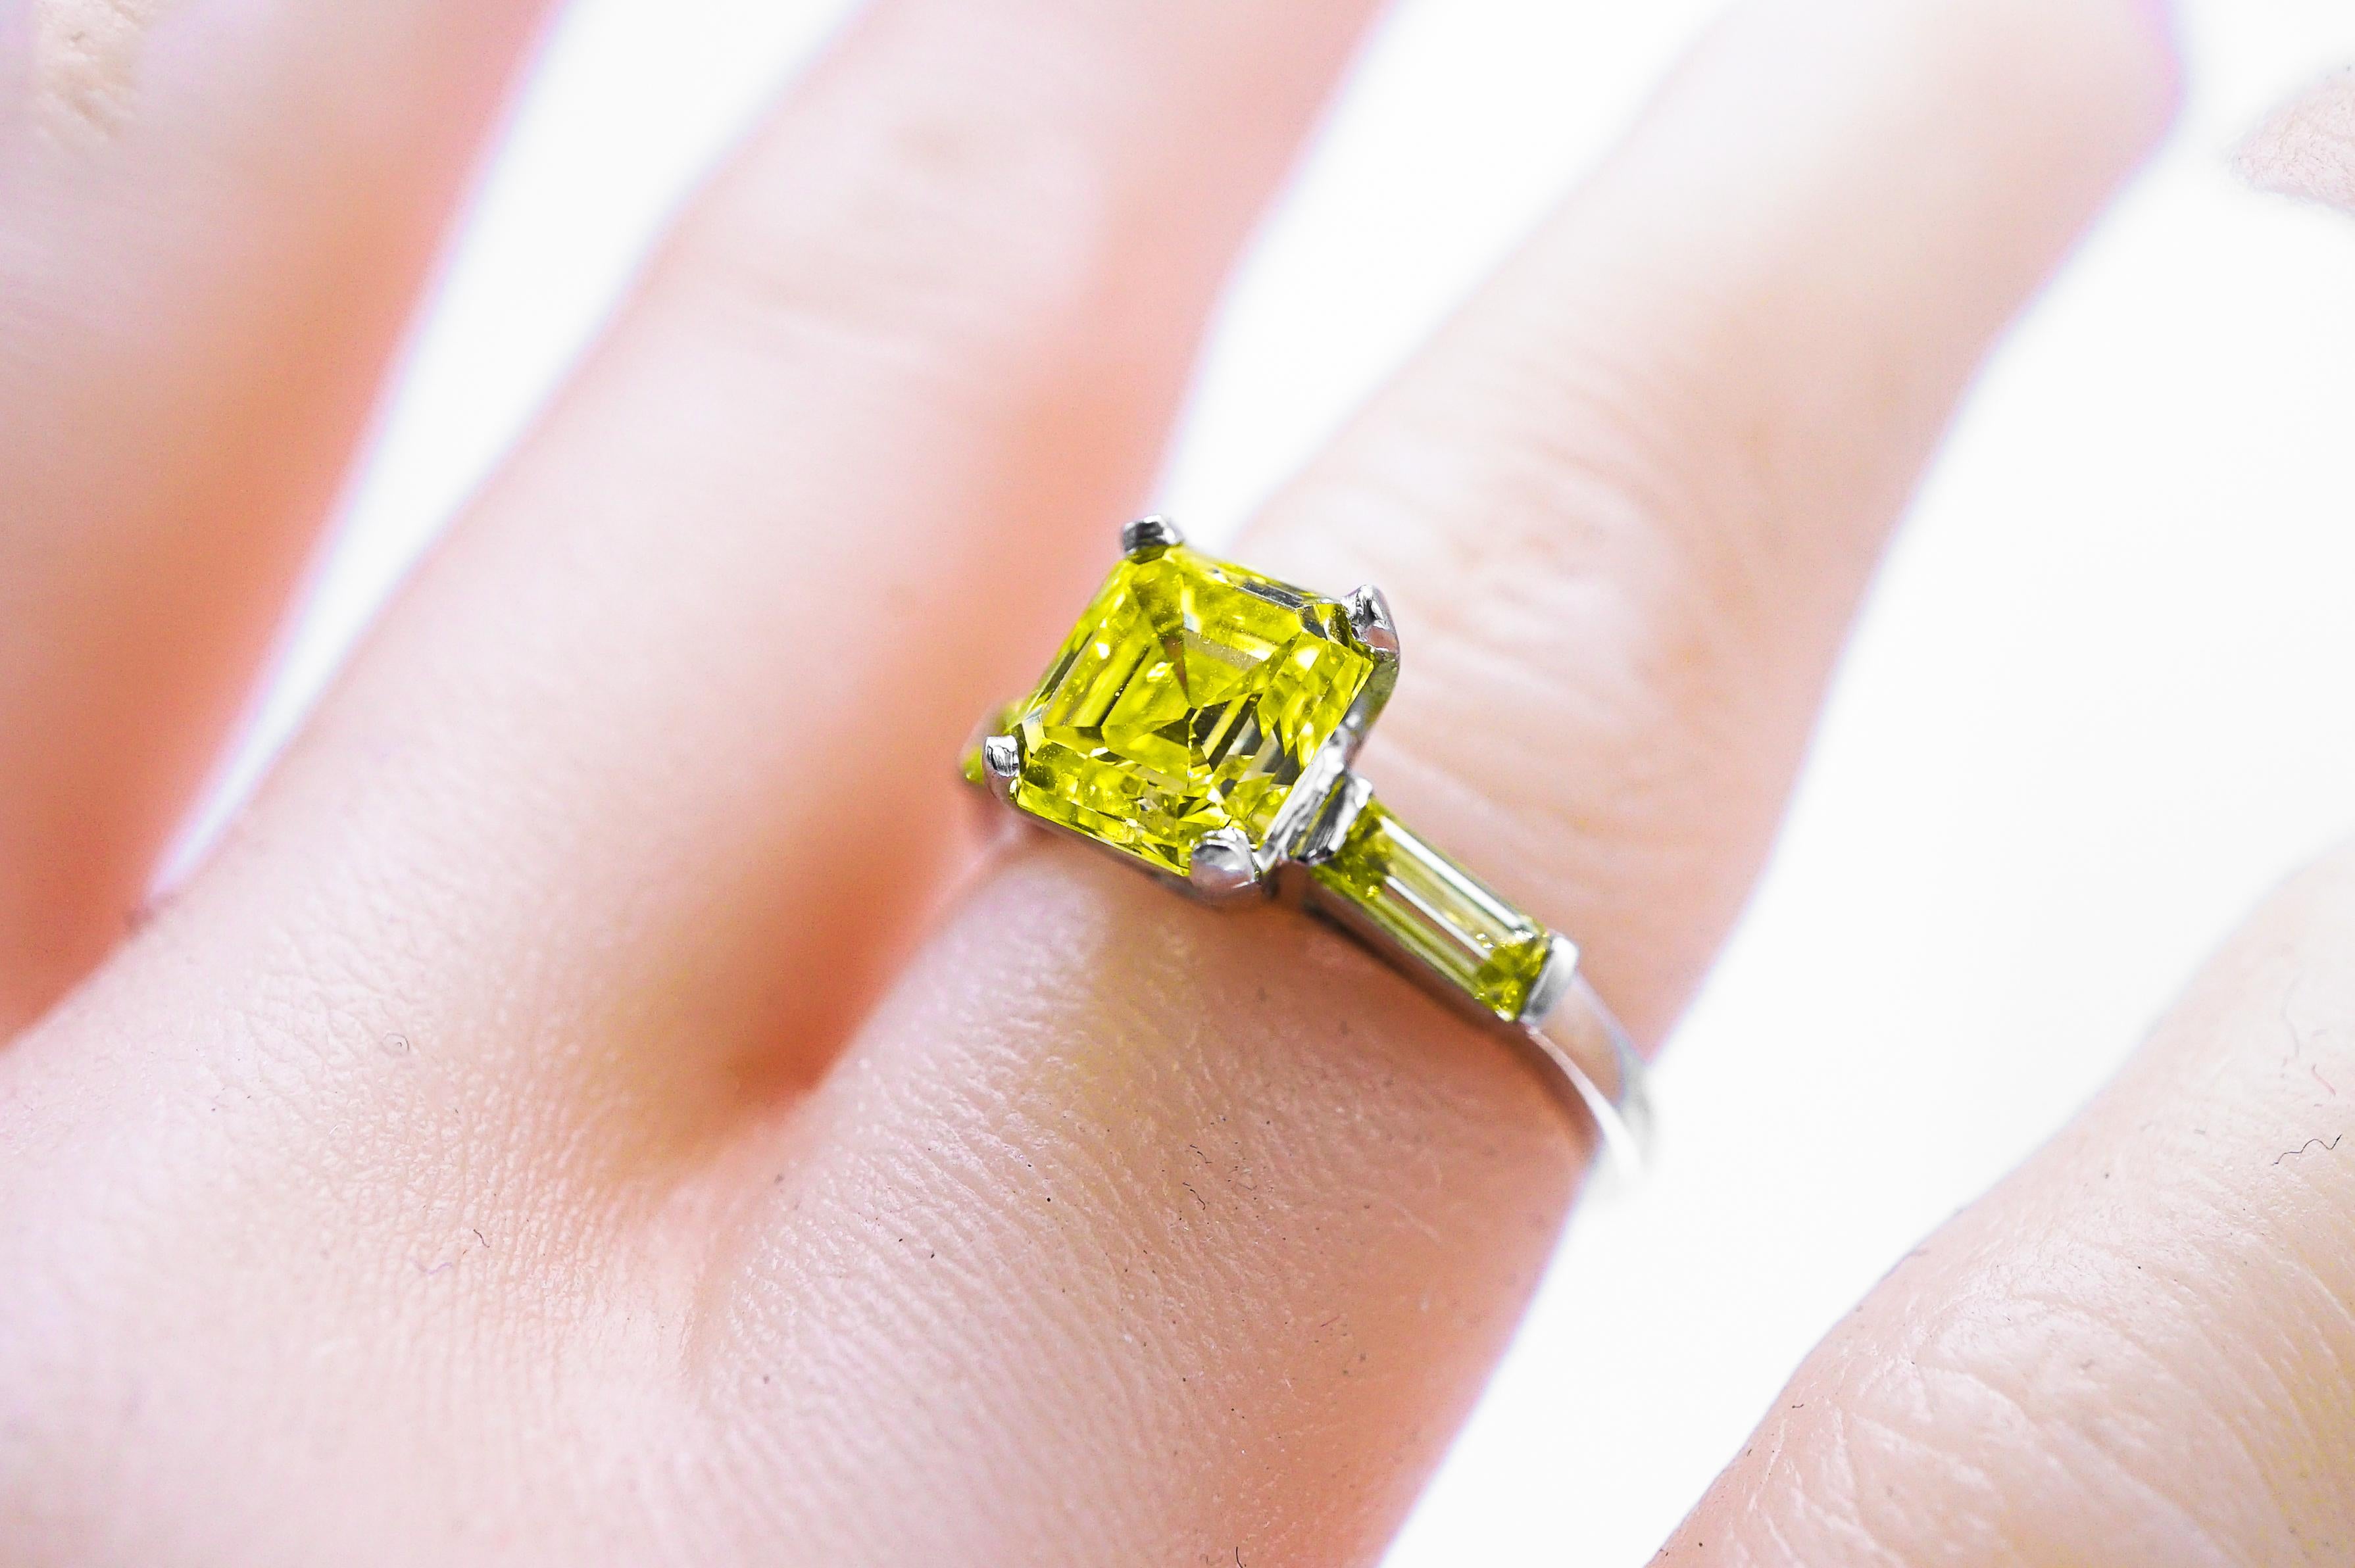 This J.E. Caldwell & Co Platinum Yellow Diamond and Diamond Ring centers one cut-cornered step-cut emerald-cut Fancy Vivid Yellow diamond and approximately 2.26 cts., and is flanked by 2 light yellow baguette diamonds, signed J.E.C. & Co., no.